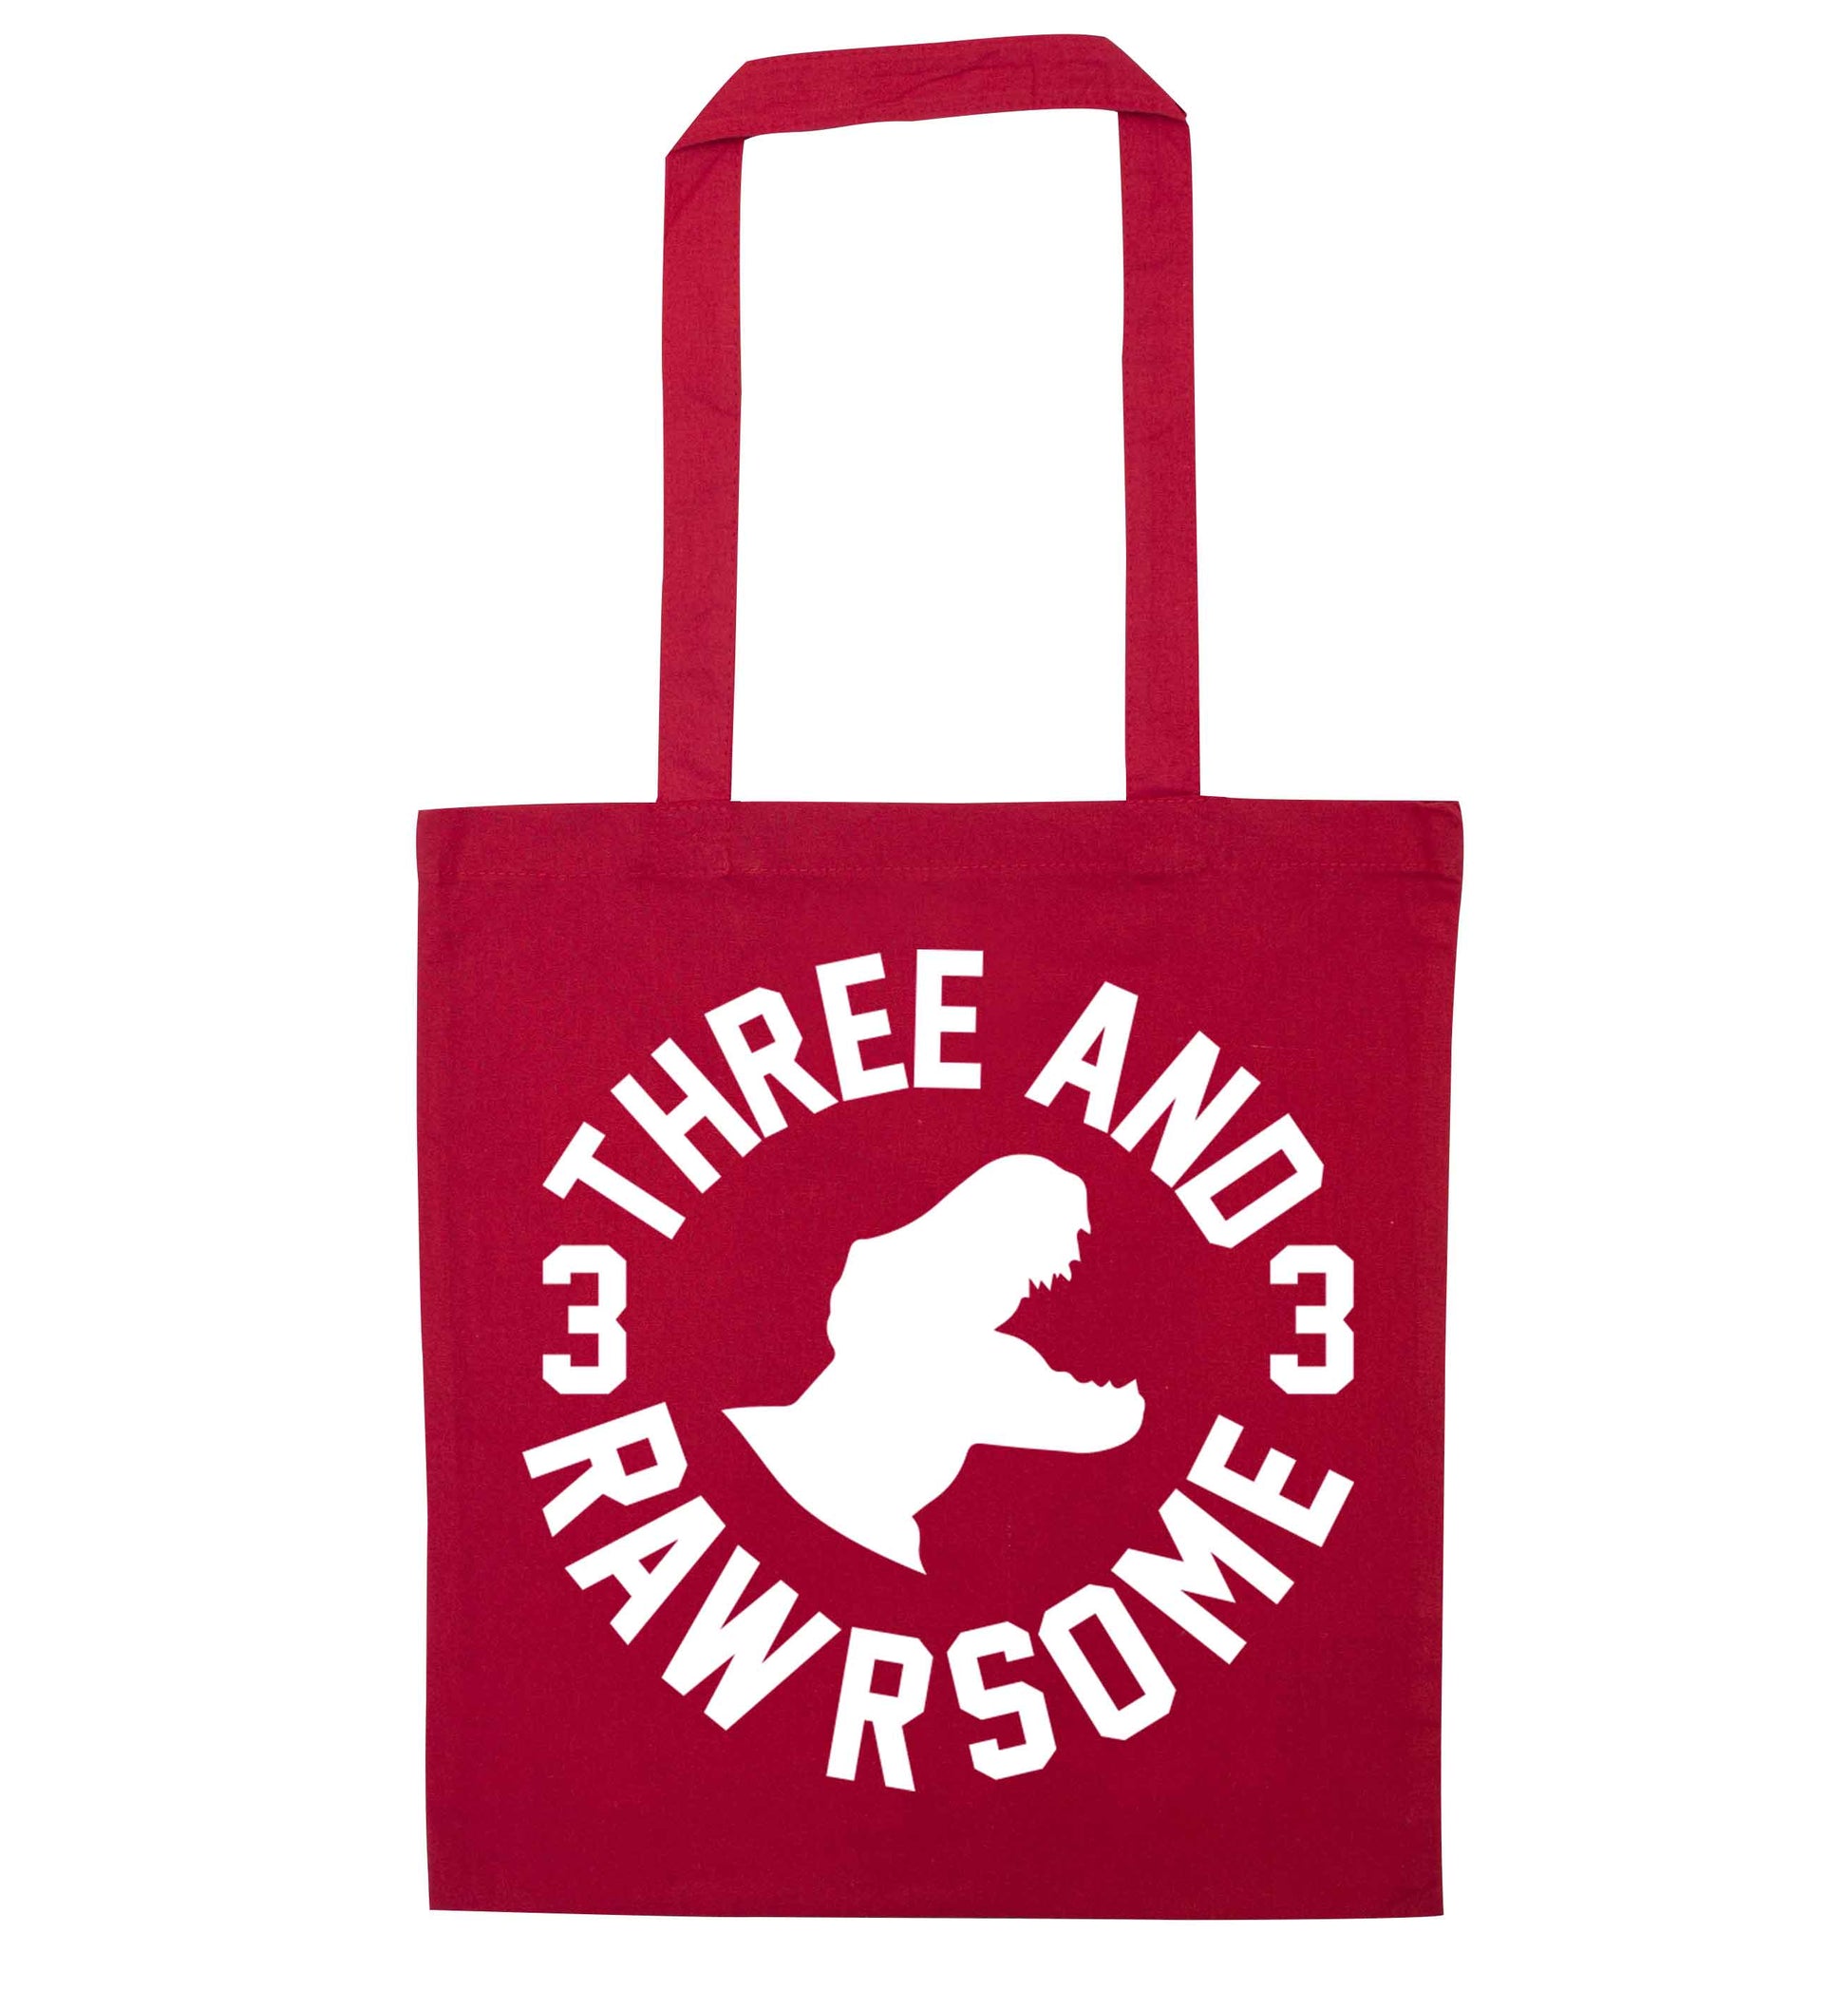 Three and rawrsome red tote bag